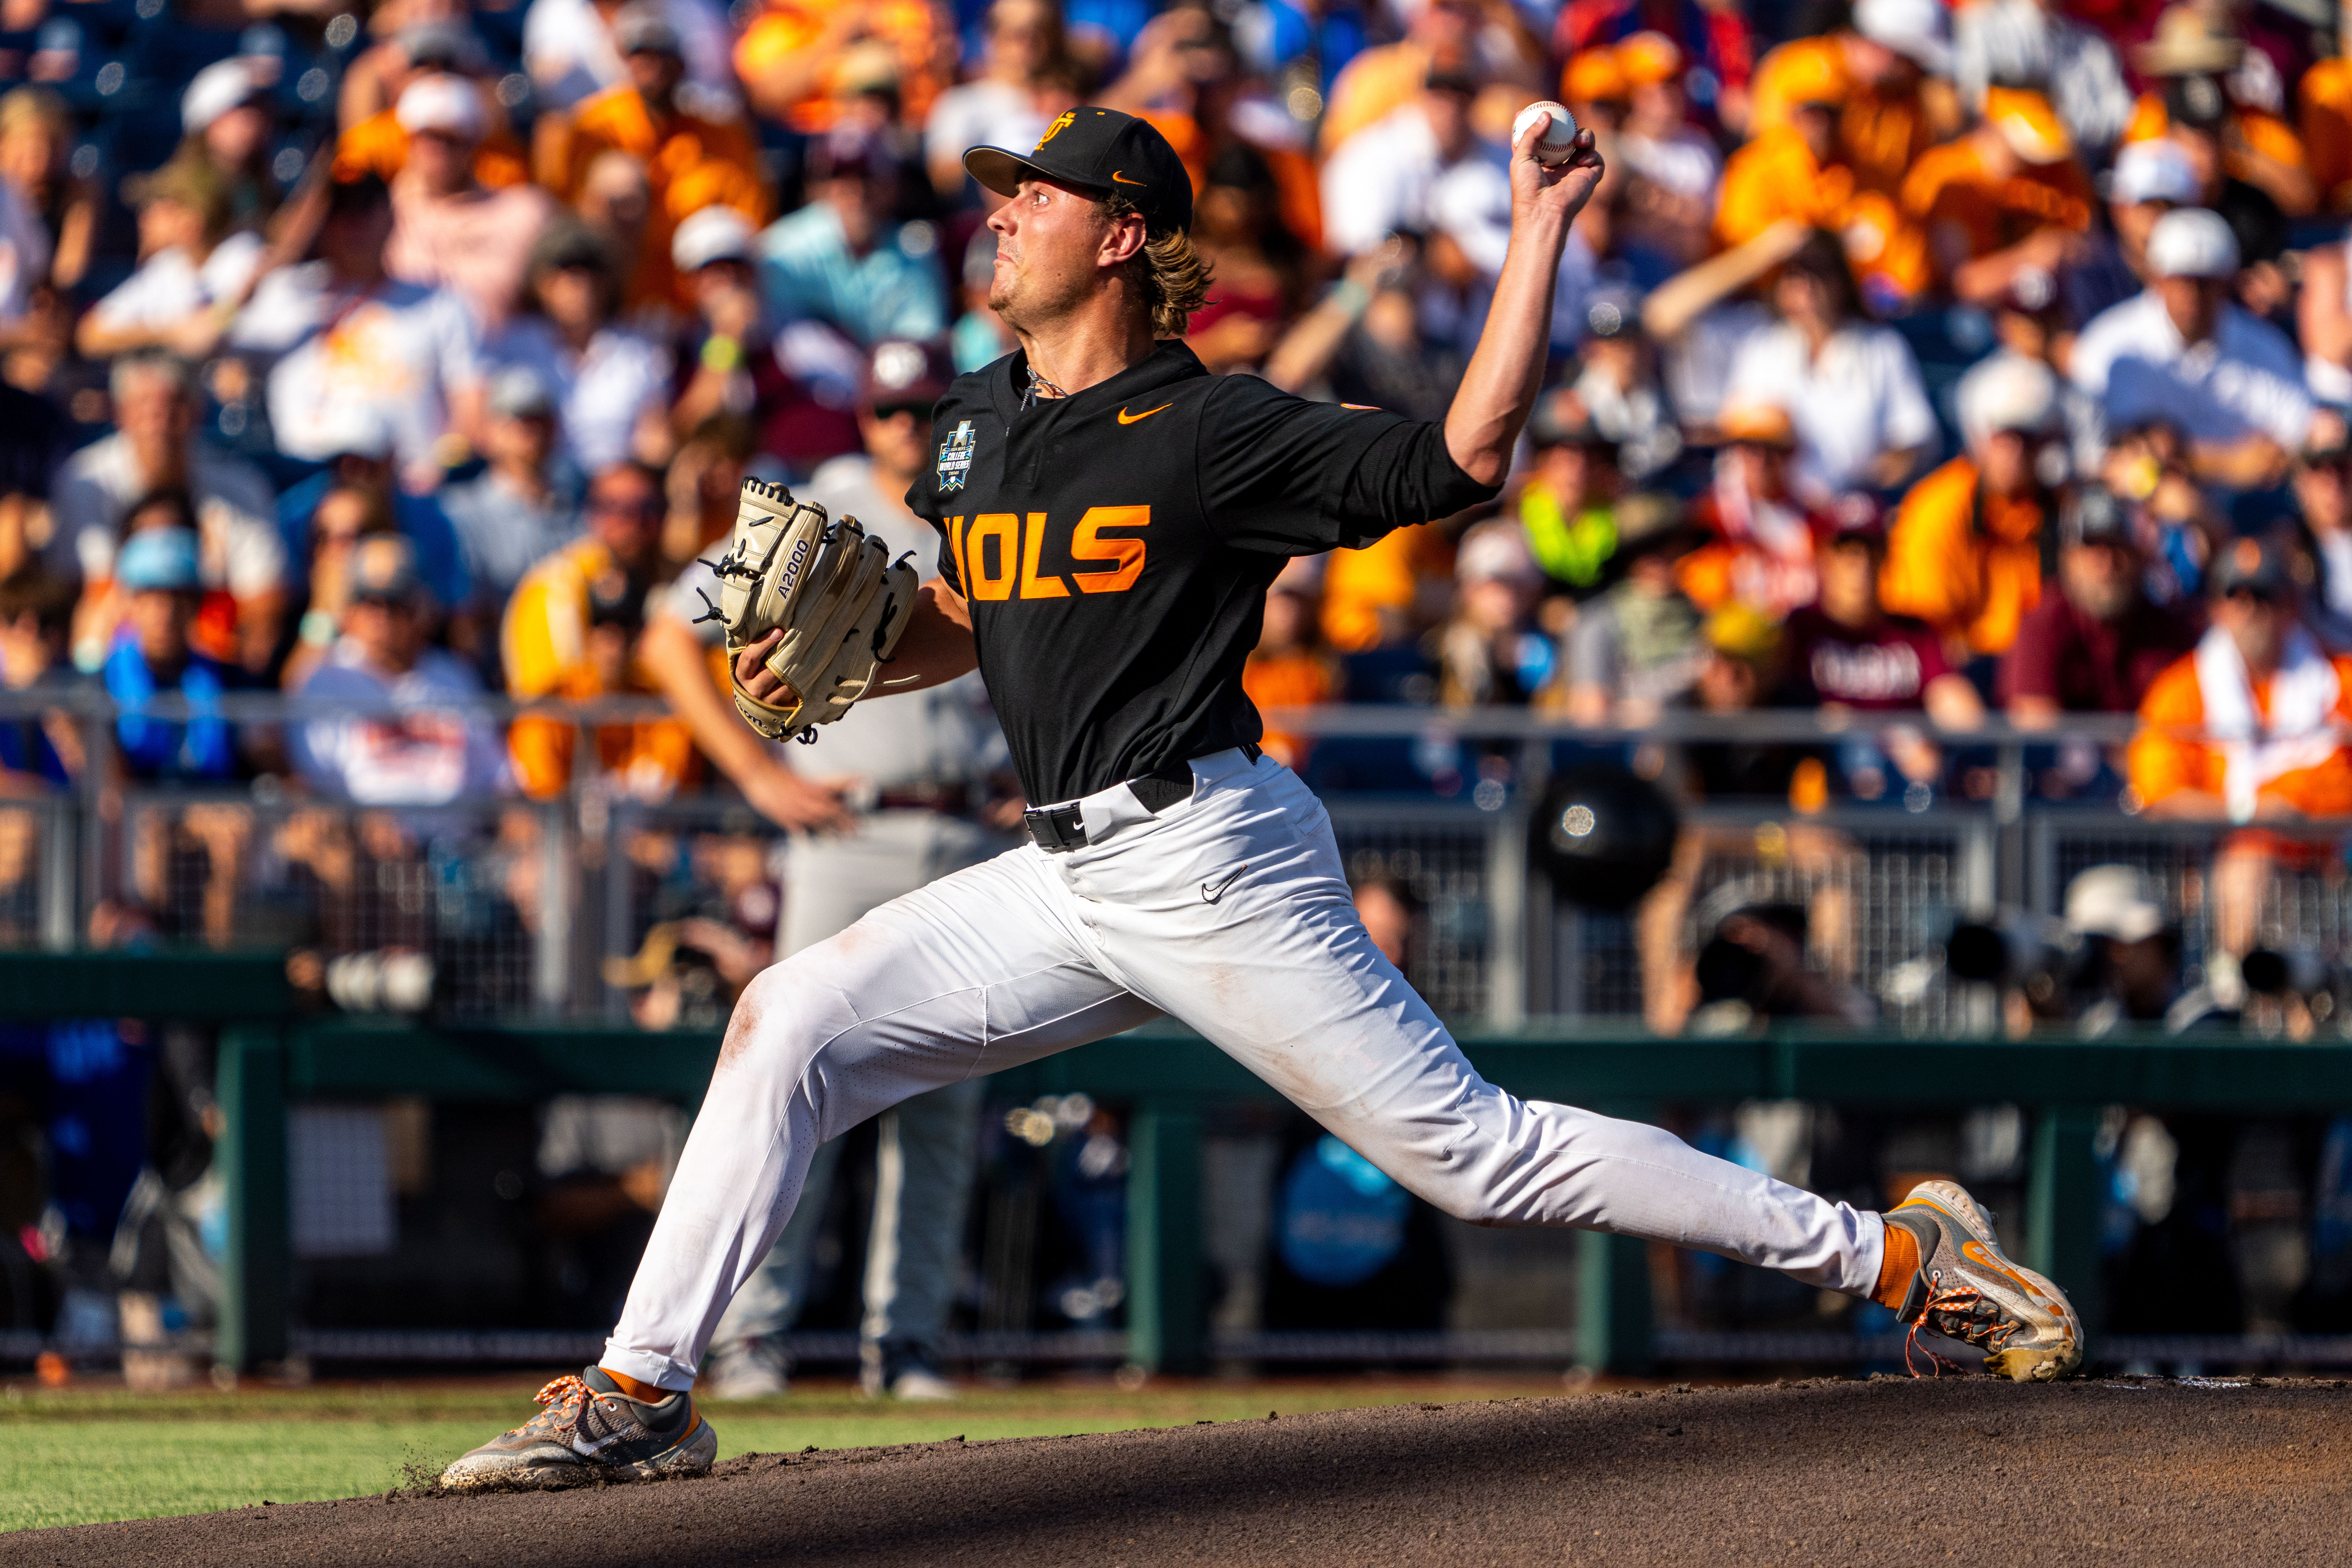 Zander Sechrist pitched 5 1/3 innings for Tennessee and allowed one run and six hits. He struck out seven batters to gain the win for the Volunteers. (Image Source: IMAGN)